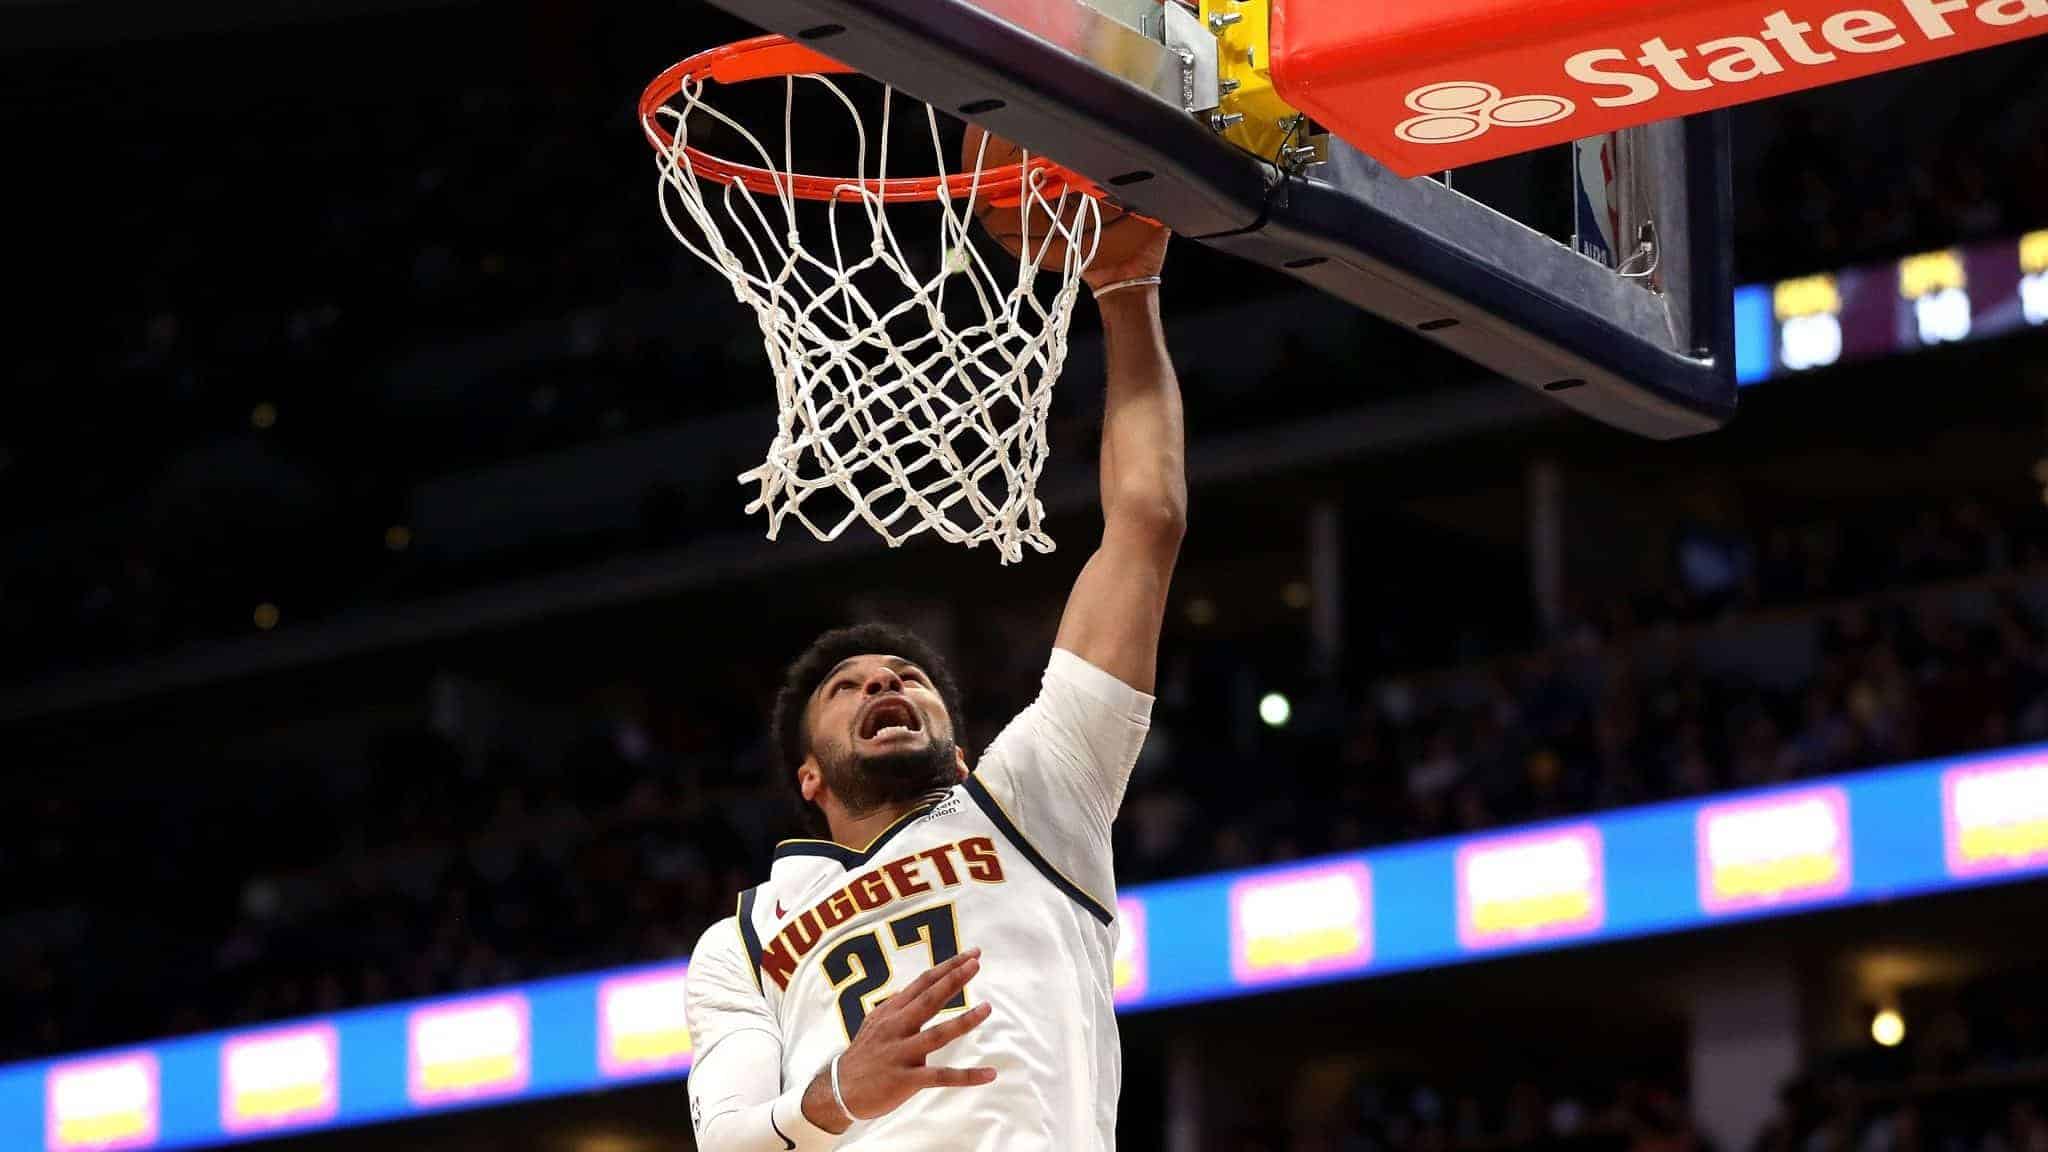 DENVER, COLORADO - JANUARY 11: Jamal Murray #27 of the Denver Nuggets dunks against the Cleveland Cavaliers in the second quarter at the Pepsi Center on January 11, 2020 in Denver, Colorado. NOTE TO USER: User expressly acknowledges and agrees that, by downloading and or using this photograph, User is consenting to the terms and conditions of the Getty Images License Agreement.